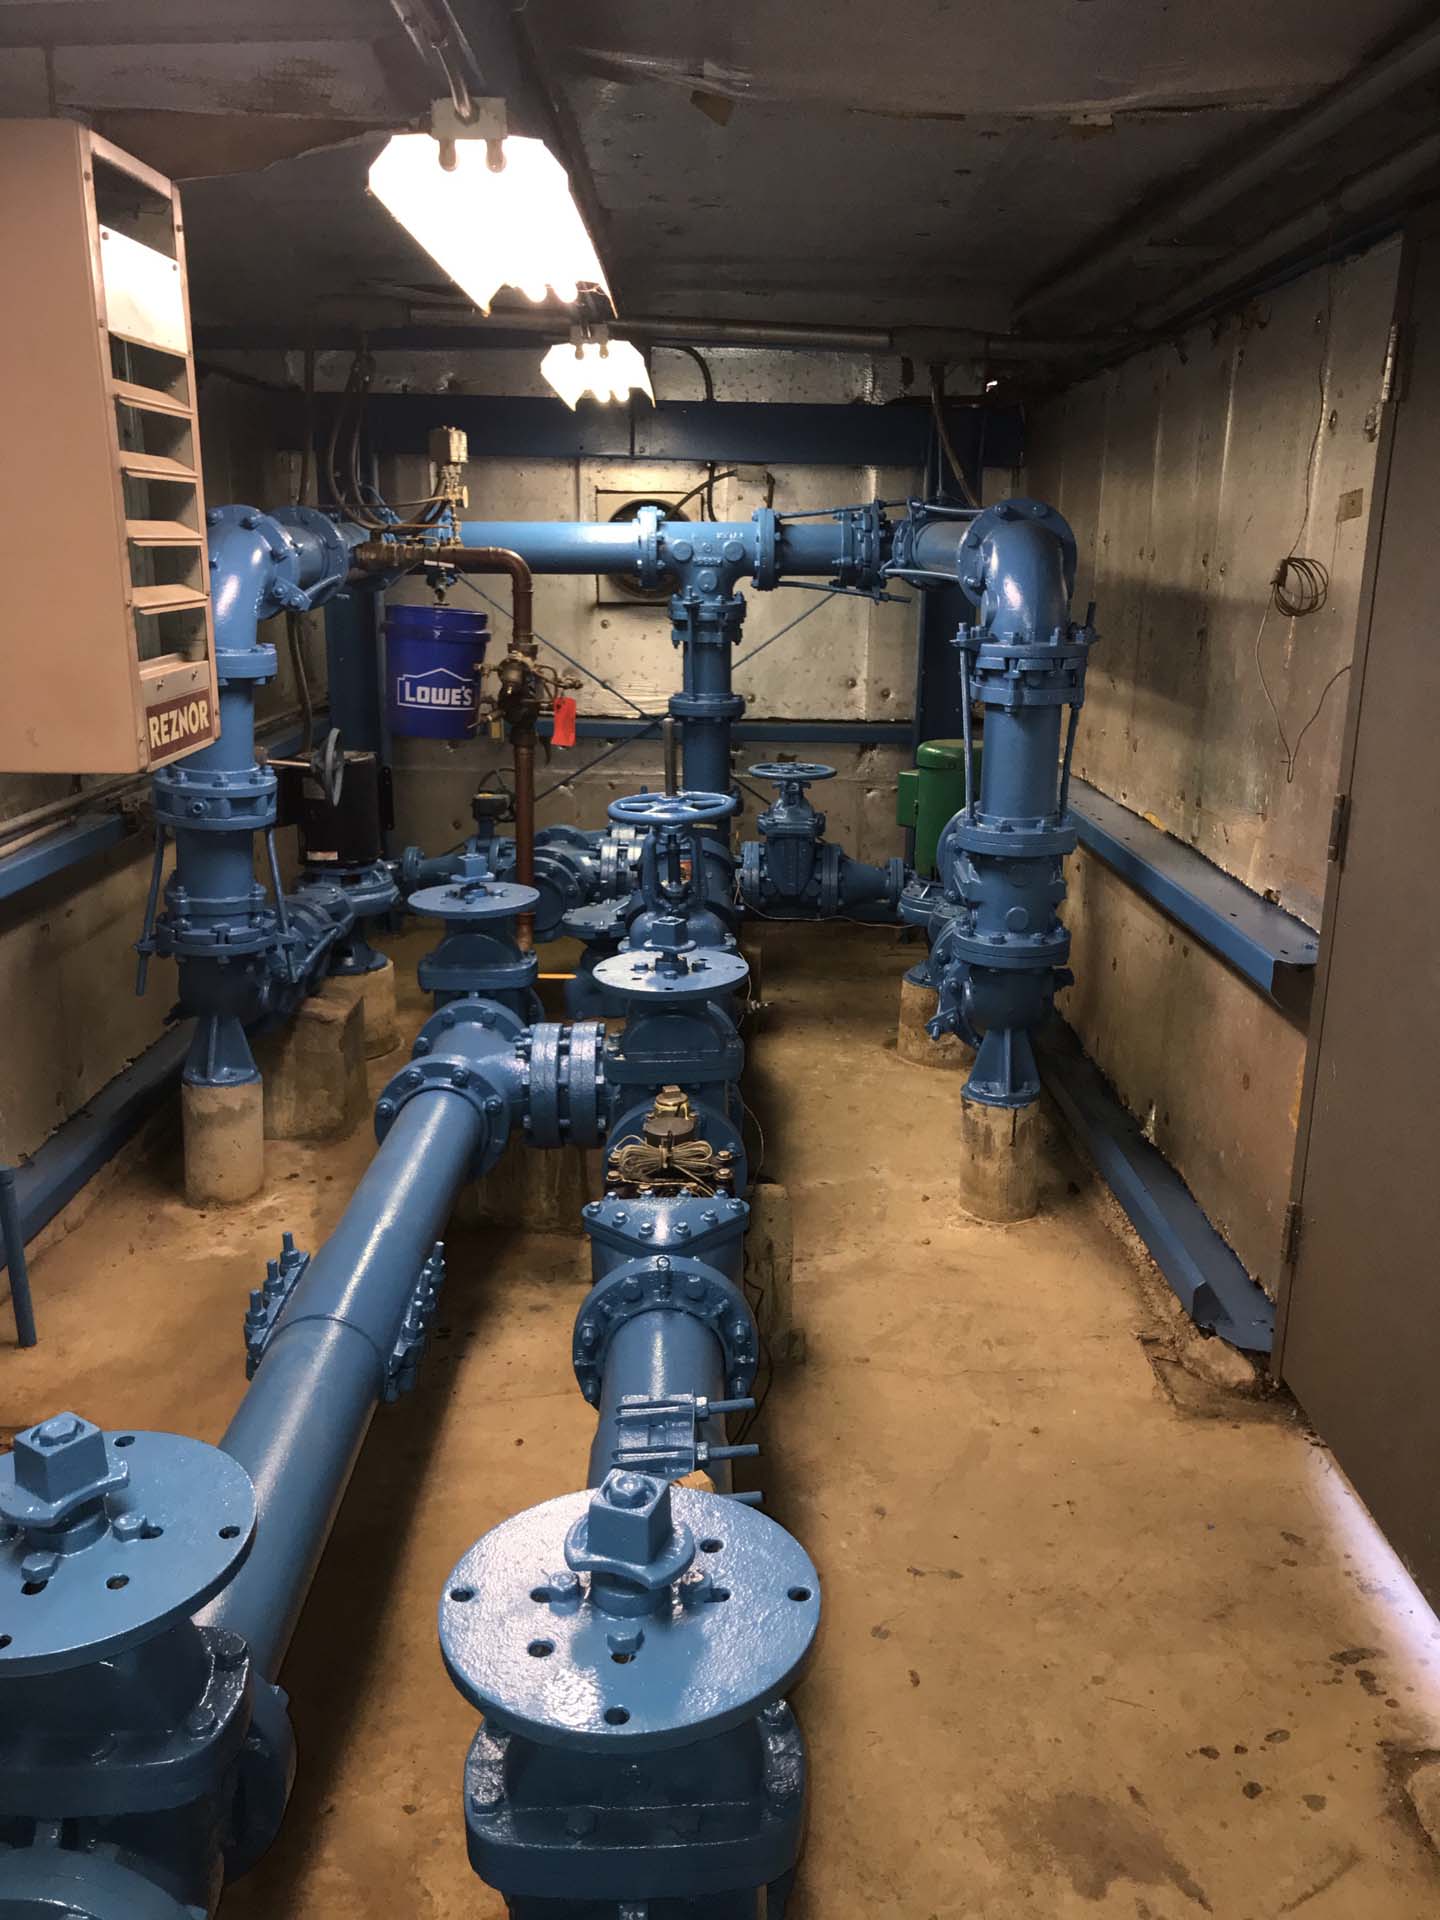 Basement of a commercial building pipes painted blue